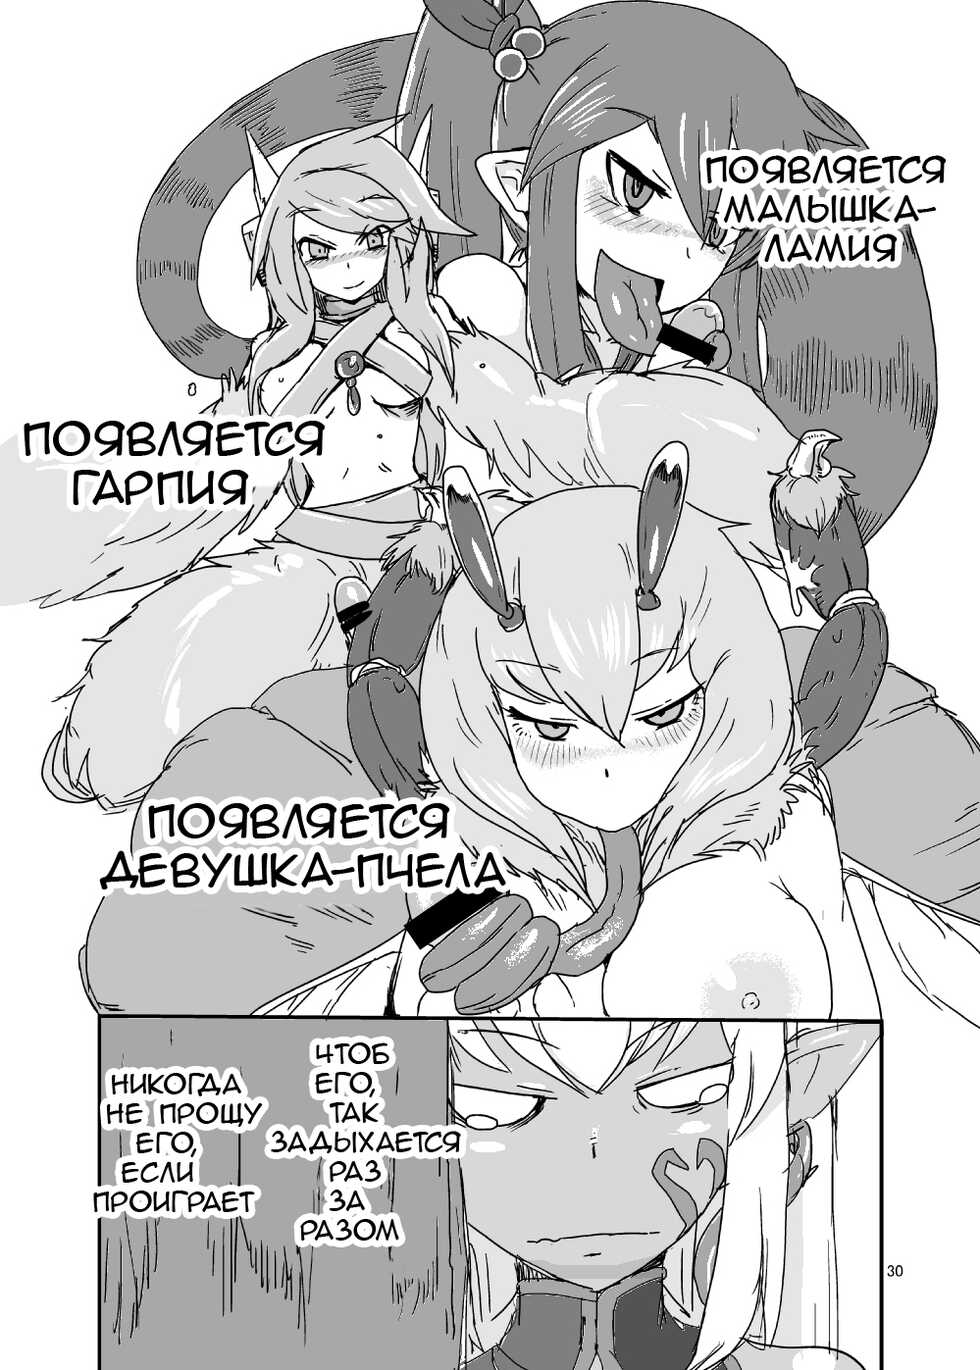 [Setouchi Pharm (Setouchi)] Mon Musu Quest! Beyond The End 2 (Monster Girl Quest!) [Russian] [﻿stycler94] [Digital] - Page 29